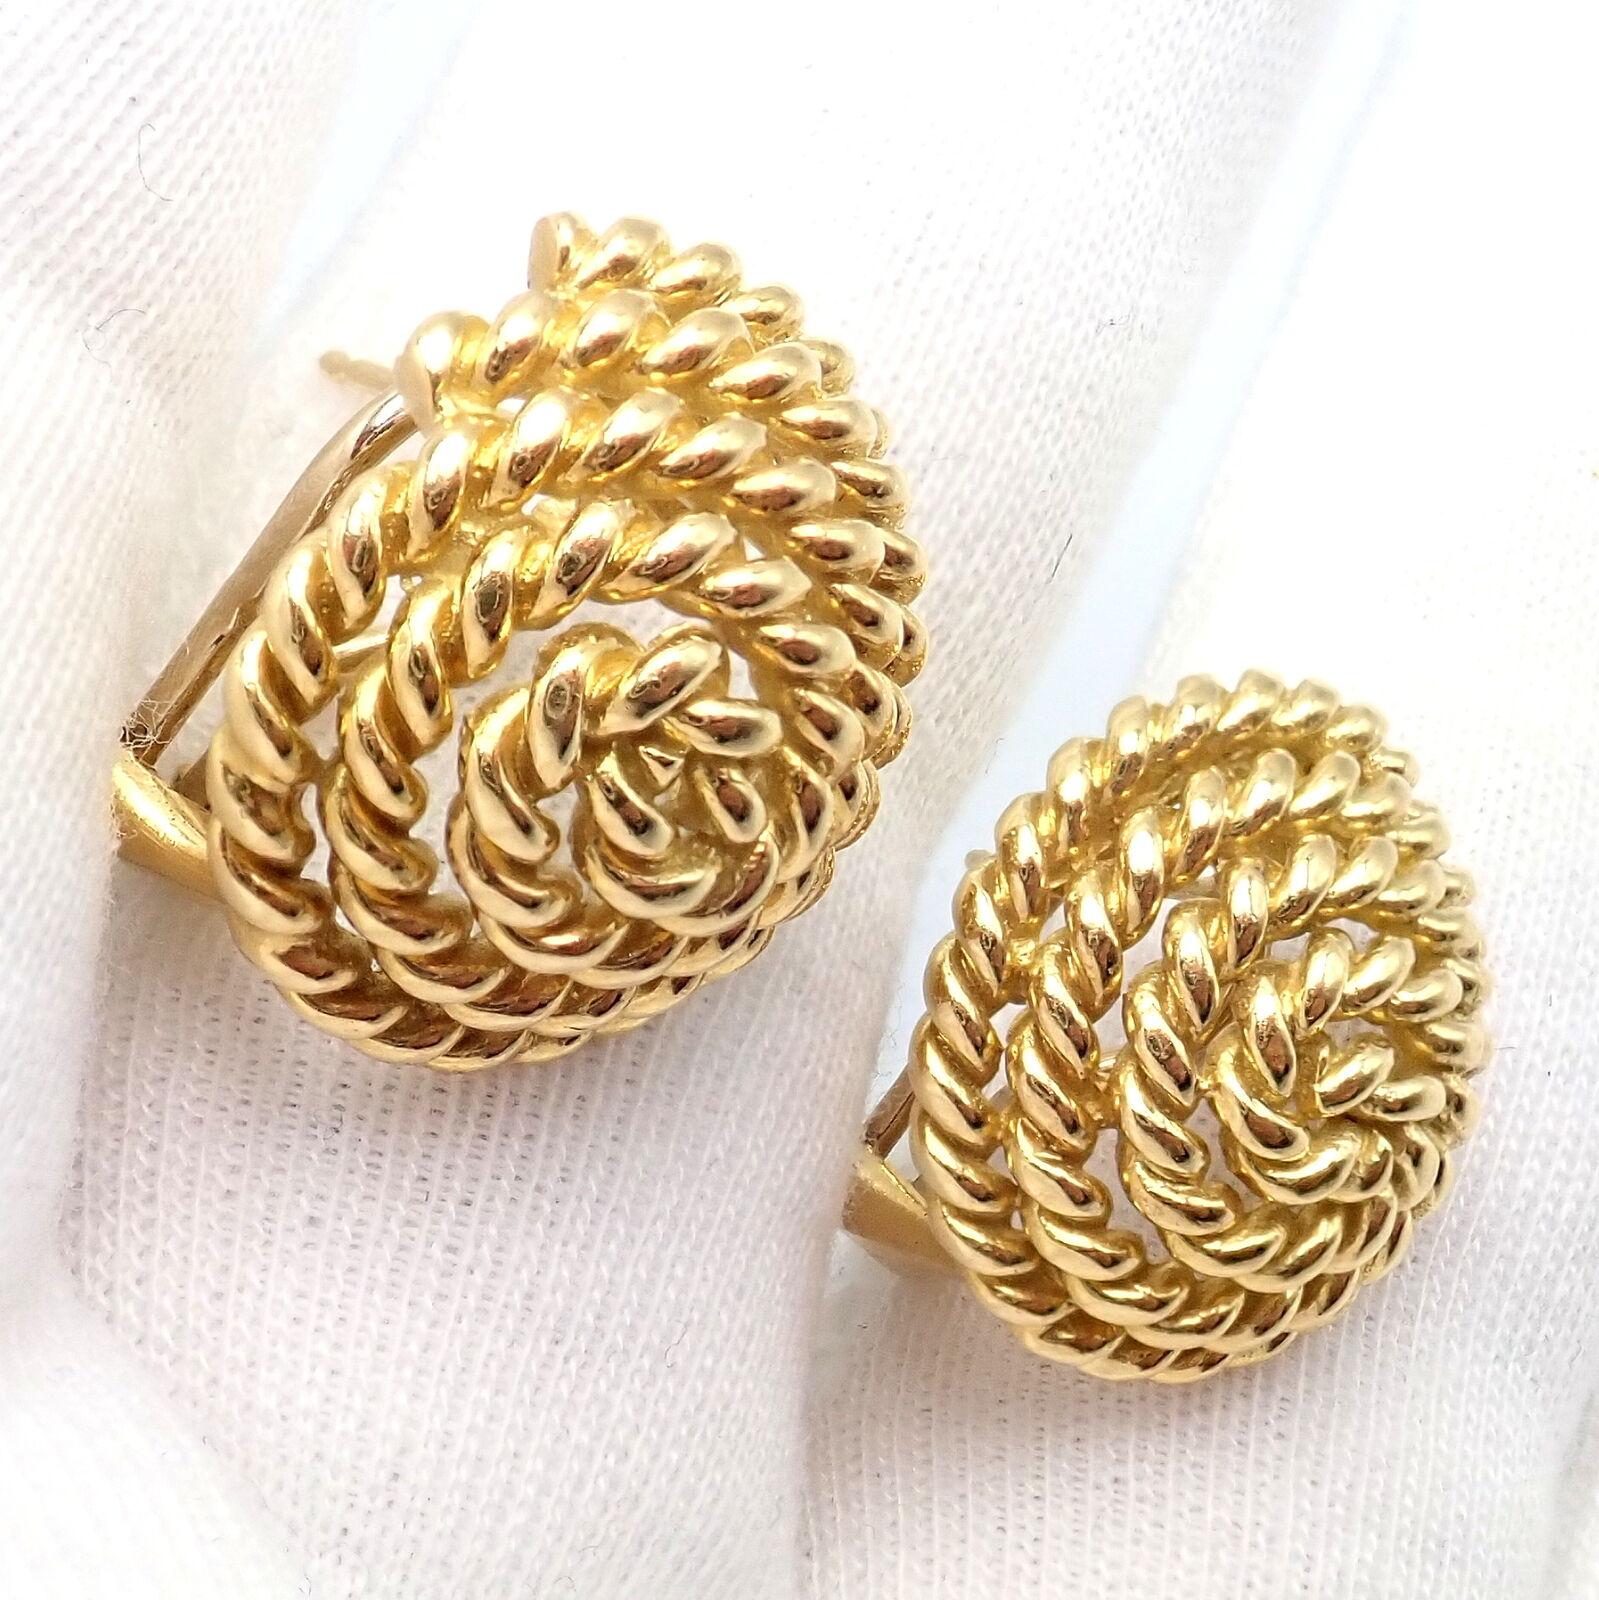 Vintage Tiffany & Co Large Coiled Rope Yellow Gold Earrings For Sale 1